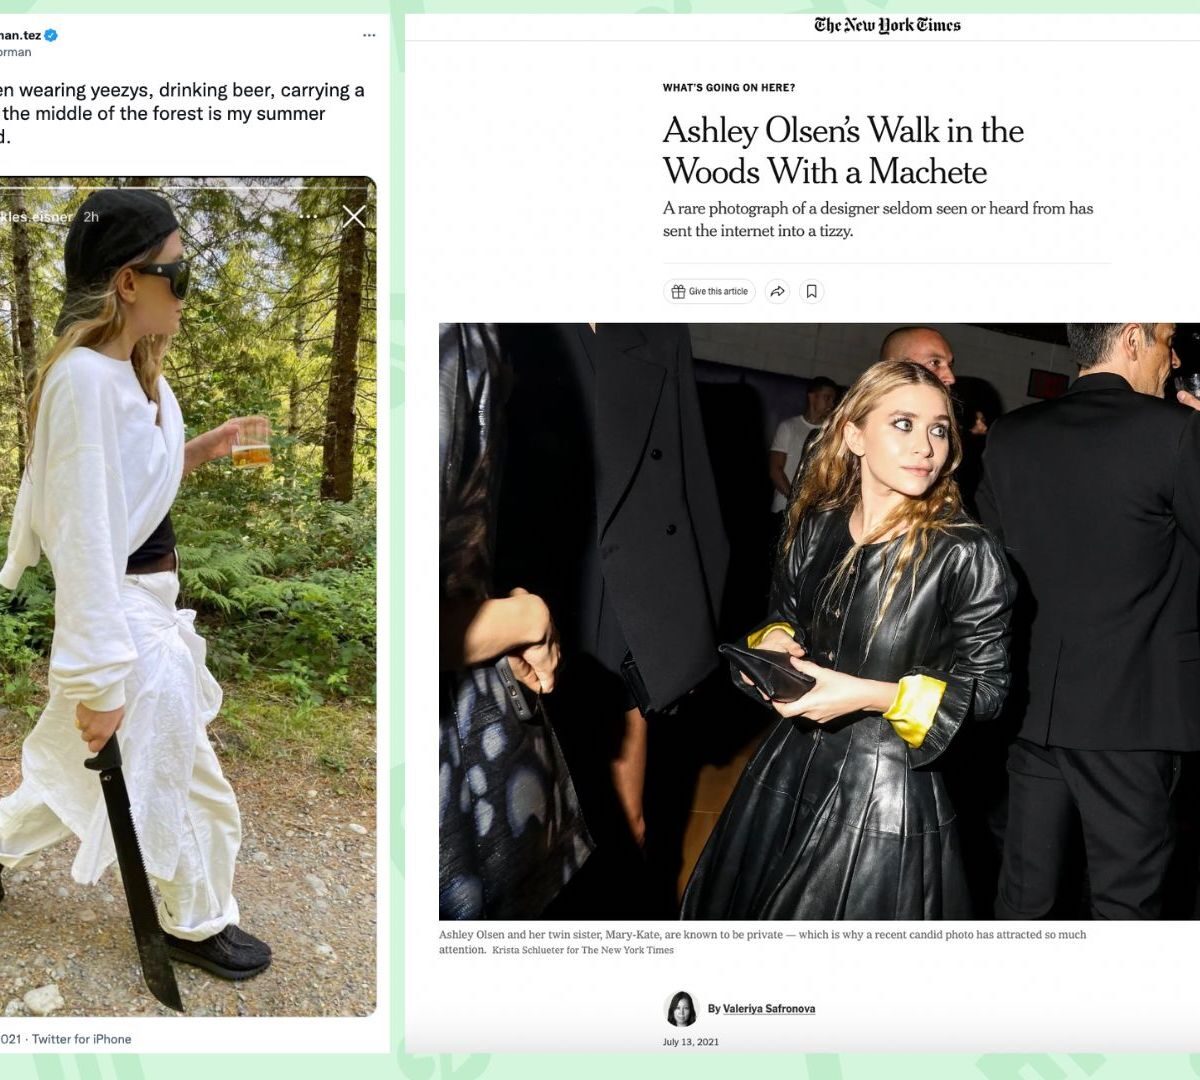 Ashley Olsen’s Walk in the Woods With a Machete